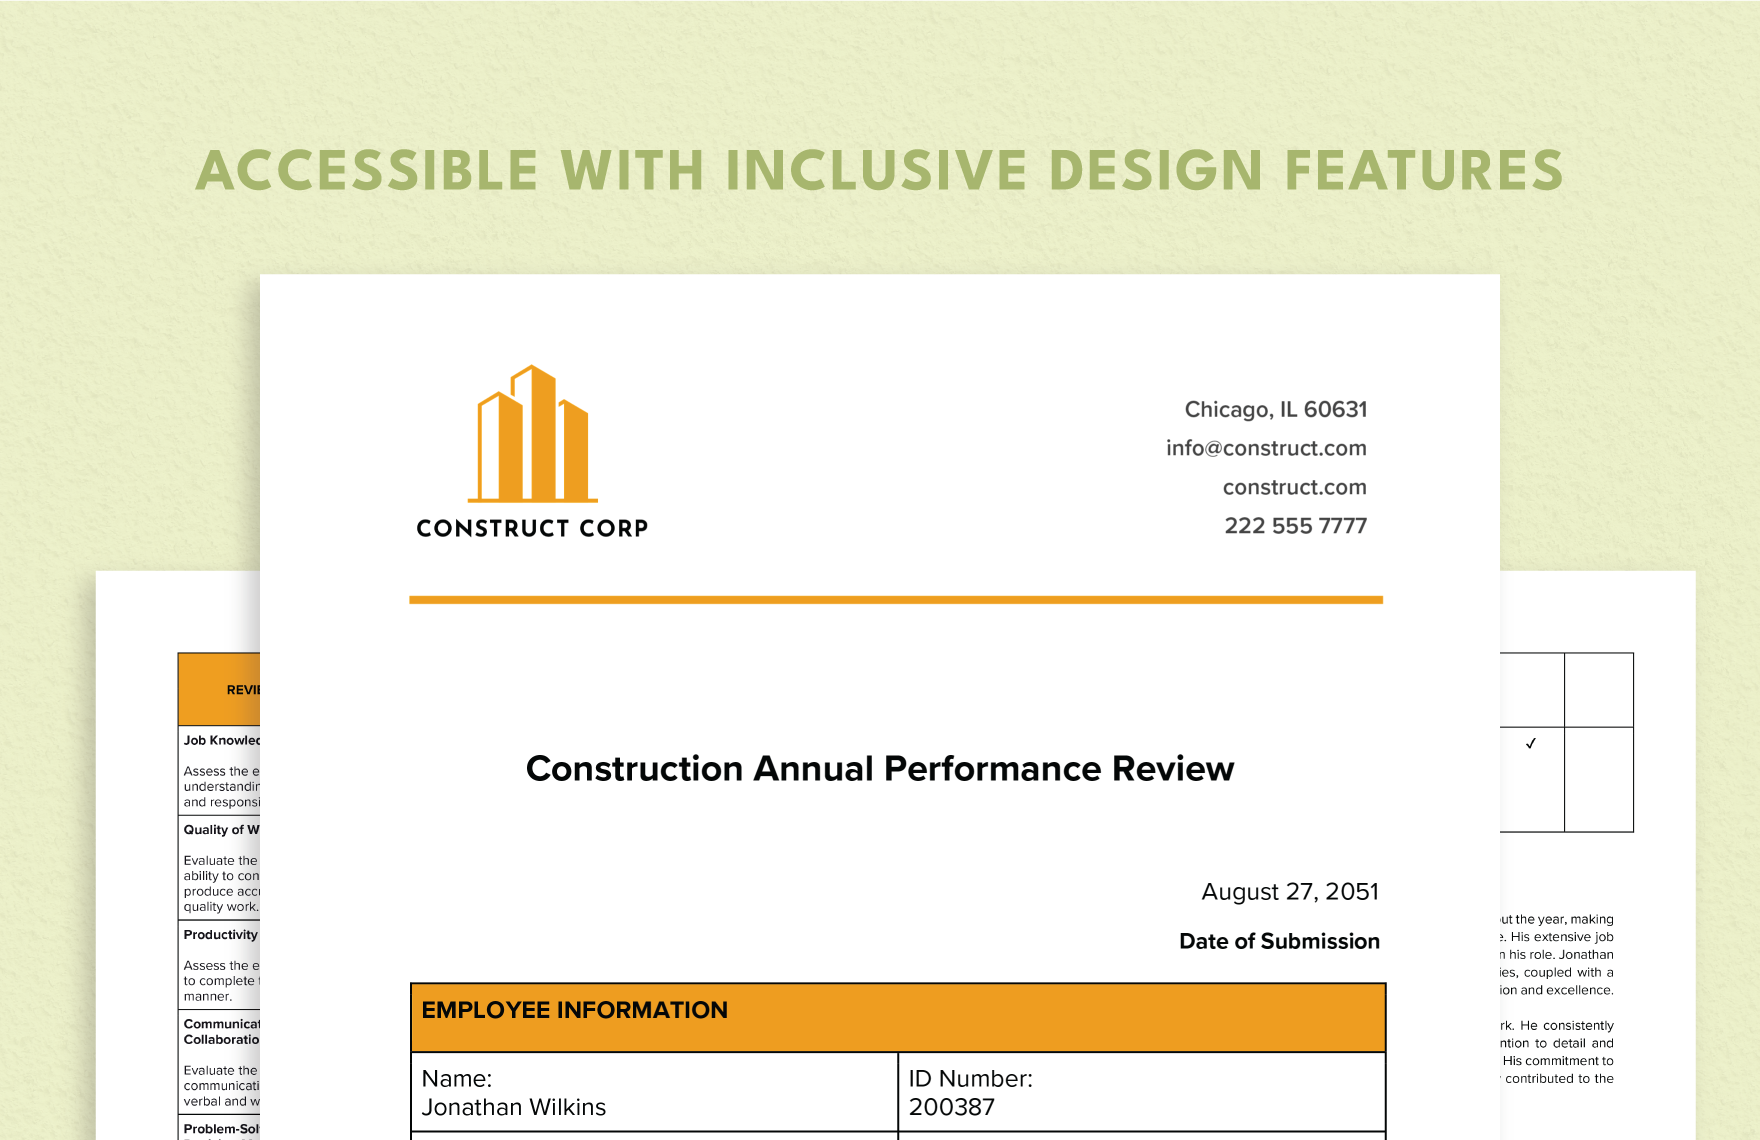 Construction Annual Performance Review Template